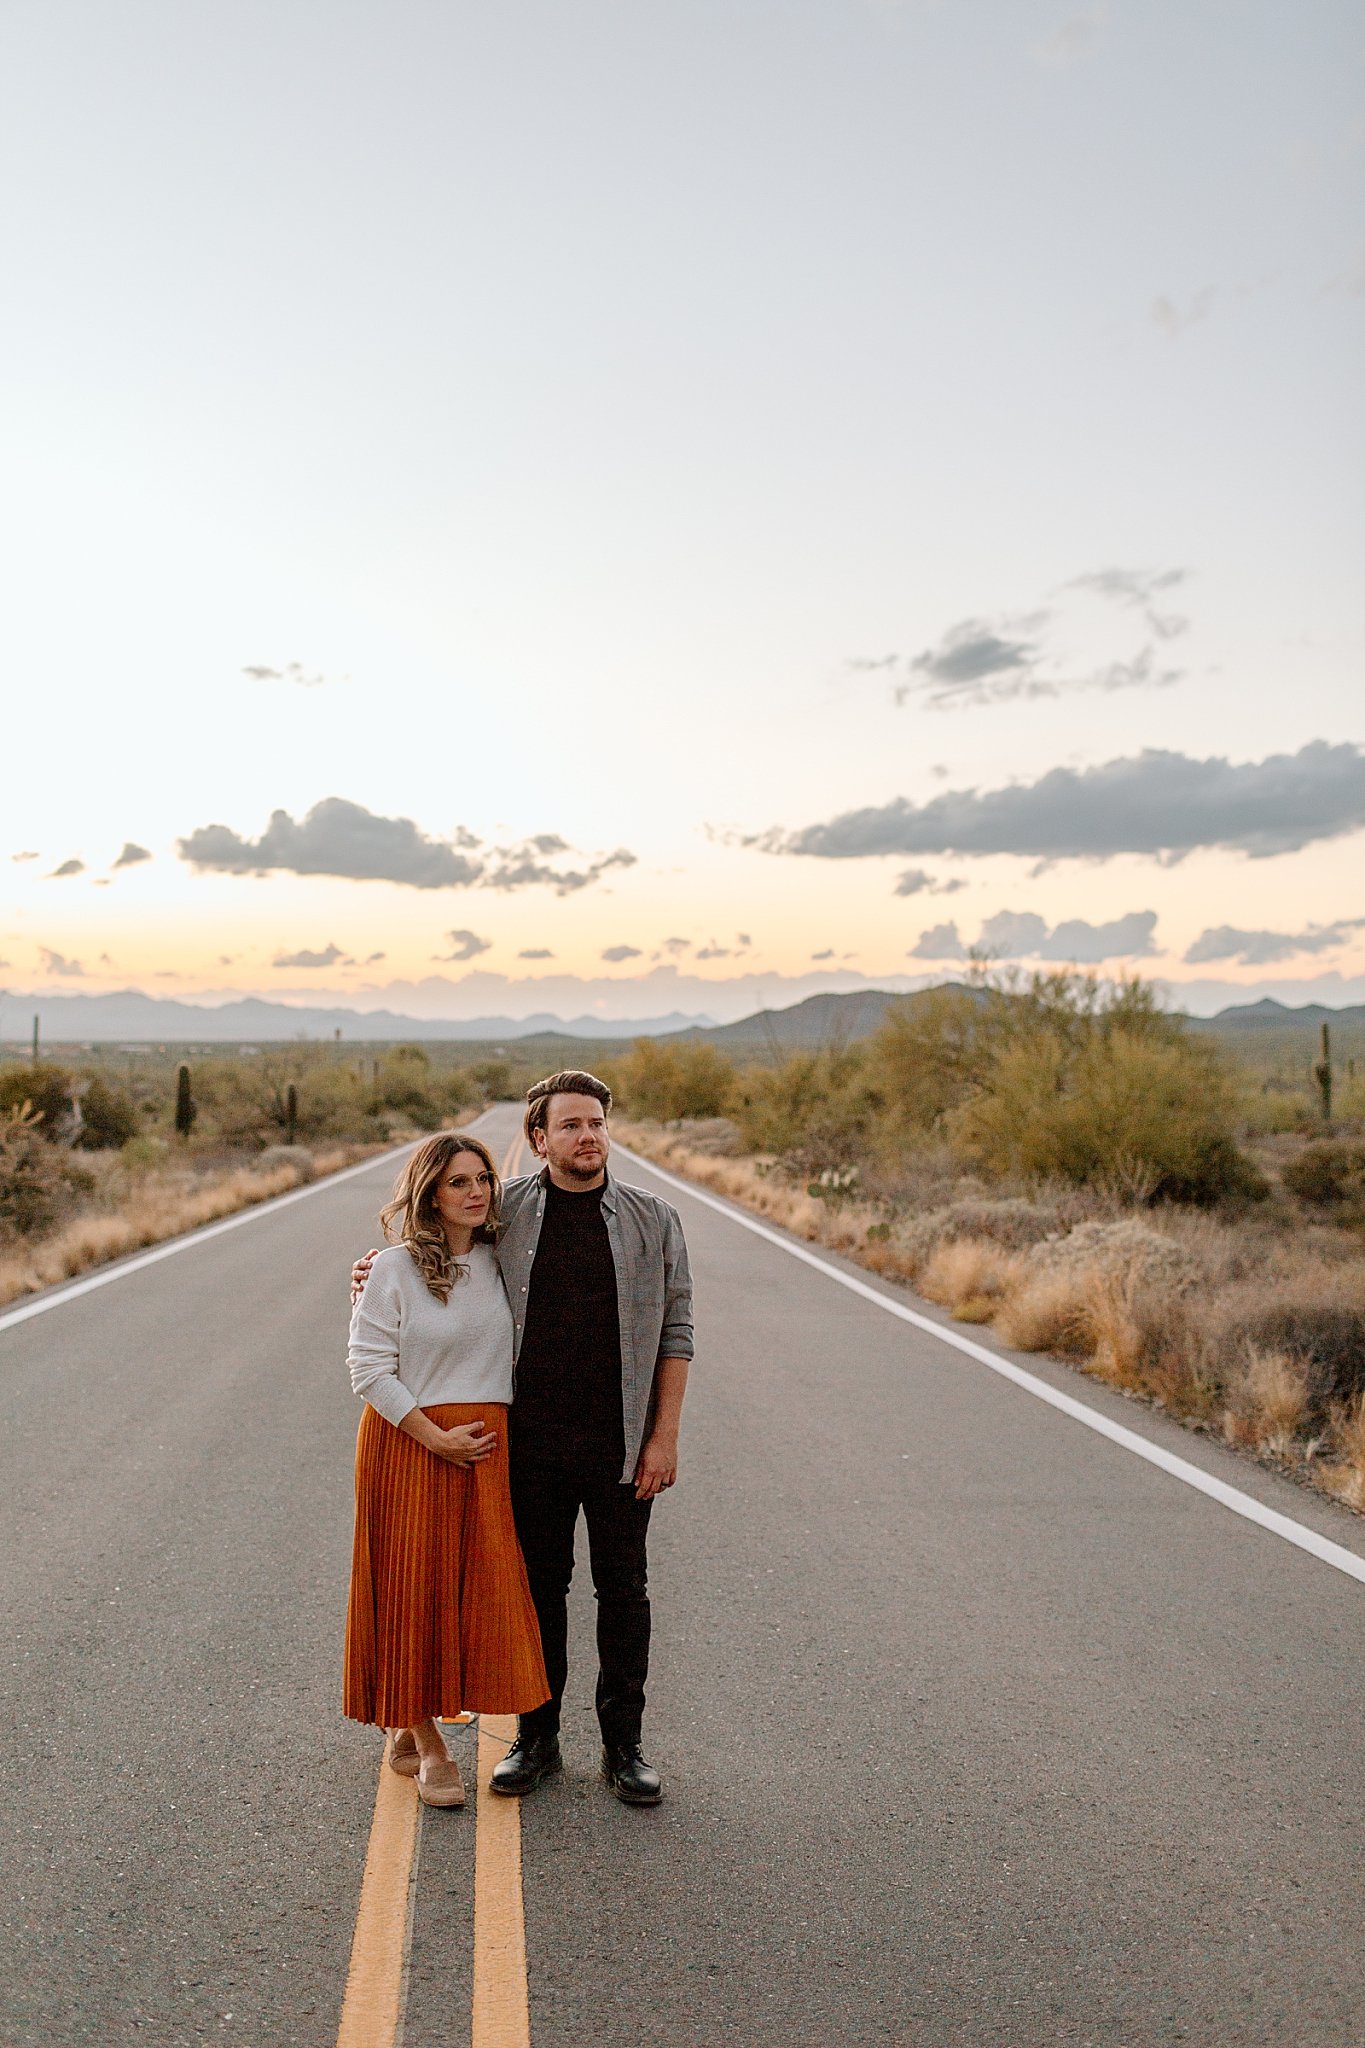  parents-to-be stand in road with sunset behind them by Lucy B Photography 